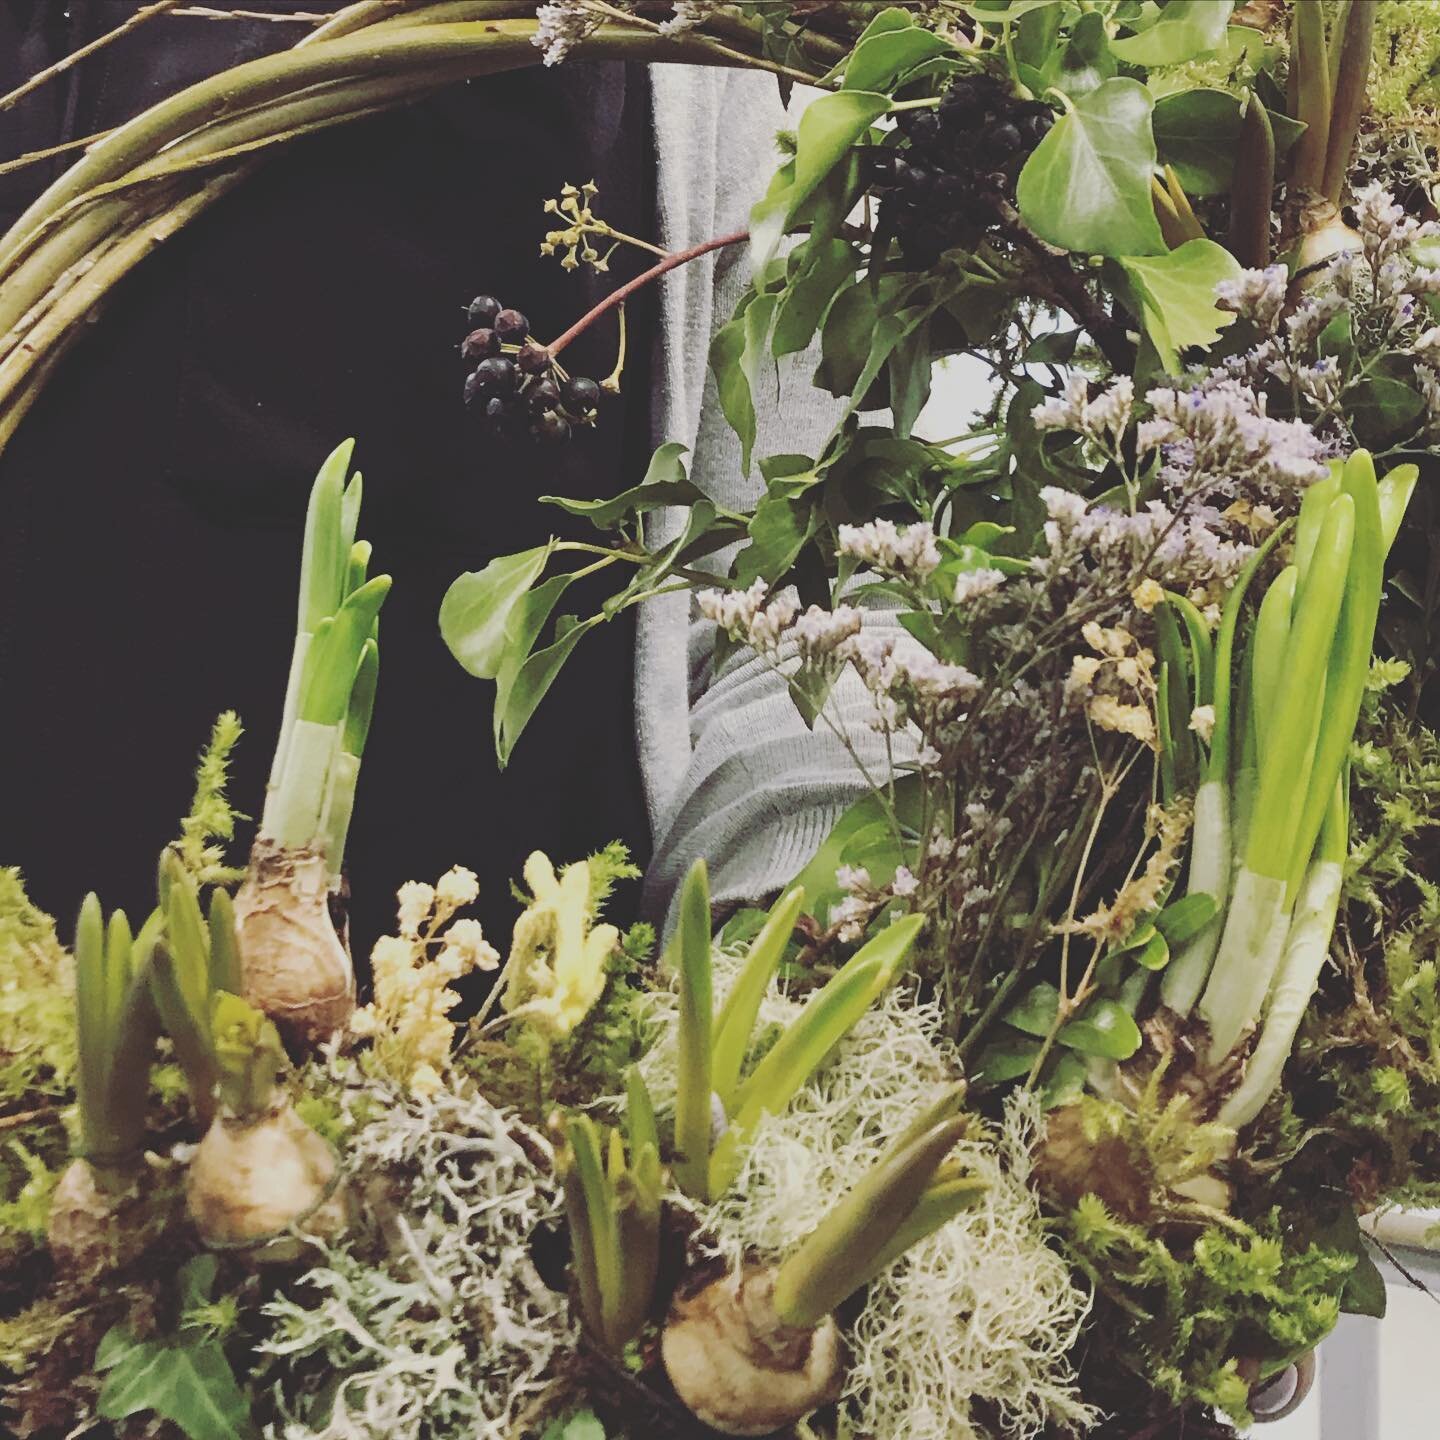 Spring wreaths with flowering bulbs workshop! I&rsquo;m running an afternoon and an evening workshop this Wednesday coming (29th March) in braemar village hall. Sorry for late notice but I hope a few can make it along.. I&rsquo;m just so excited that